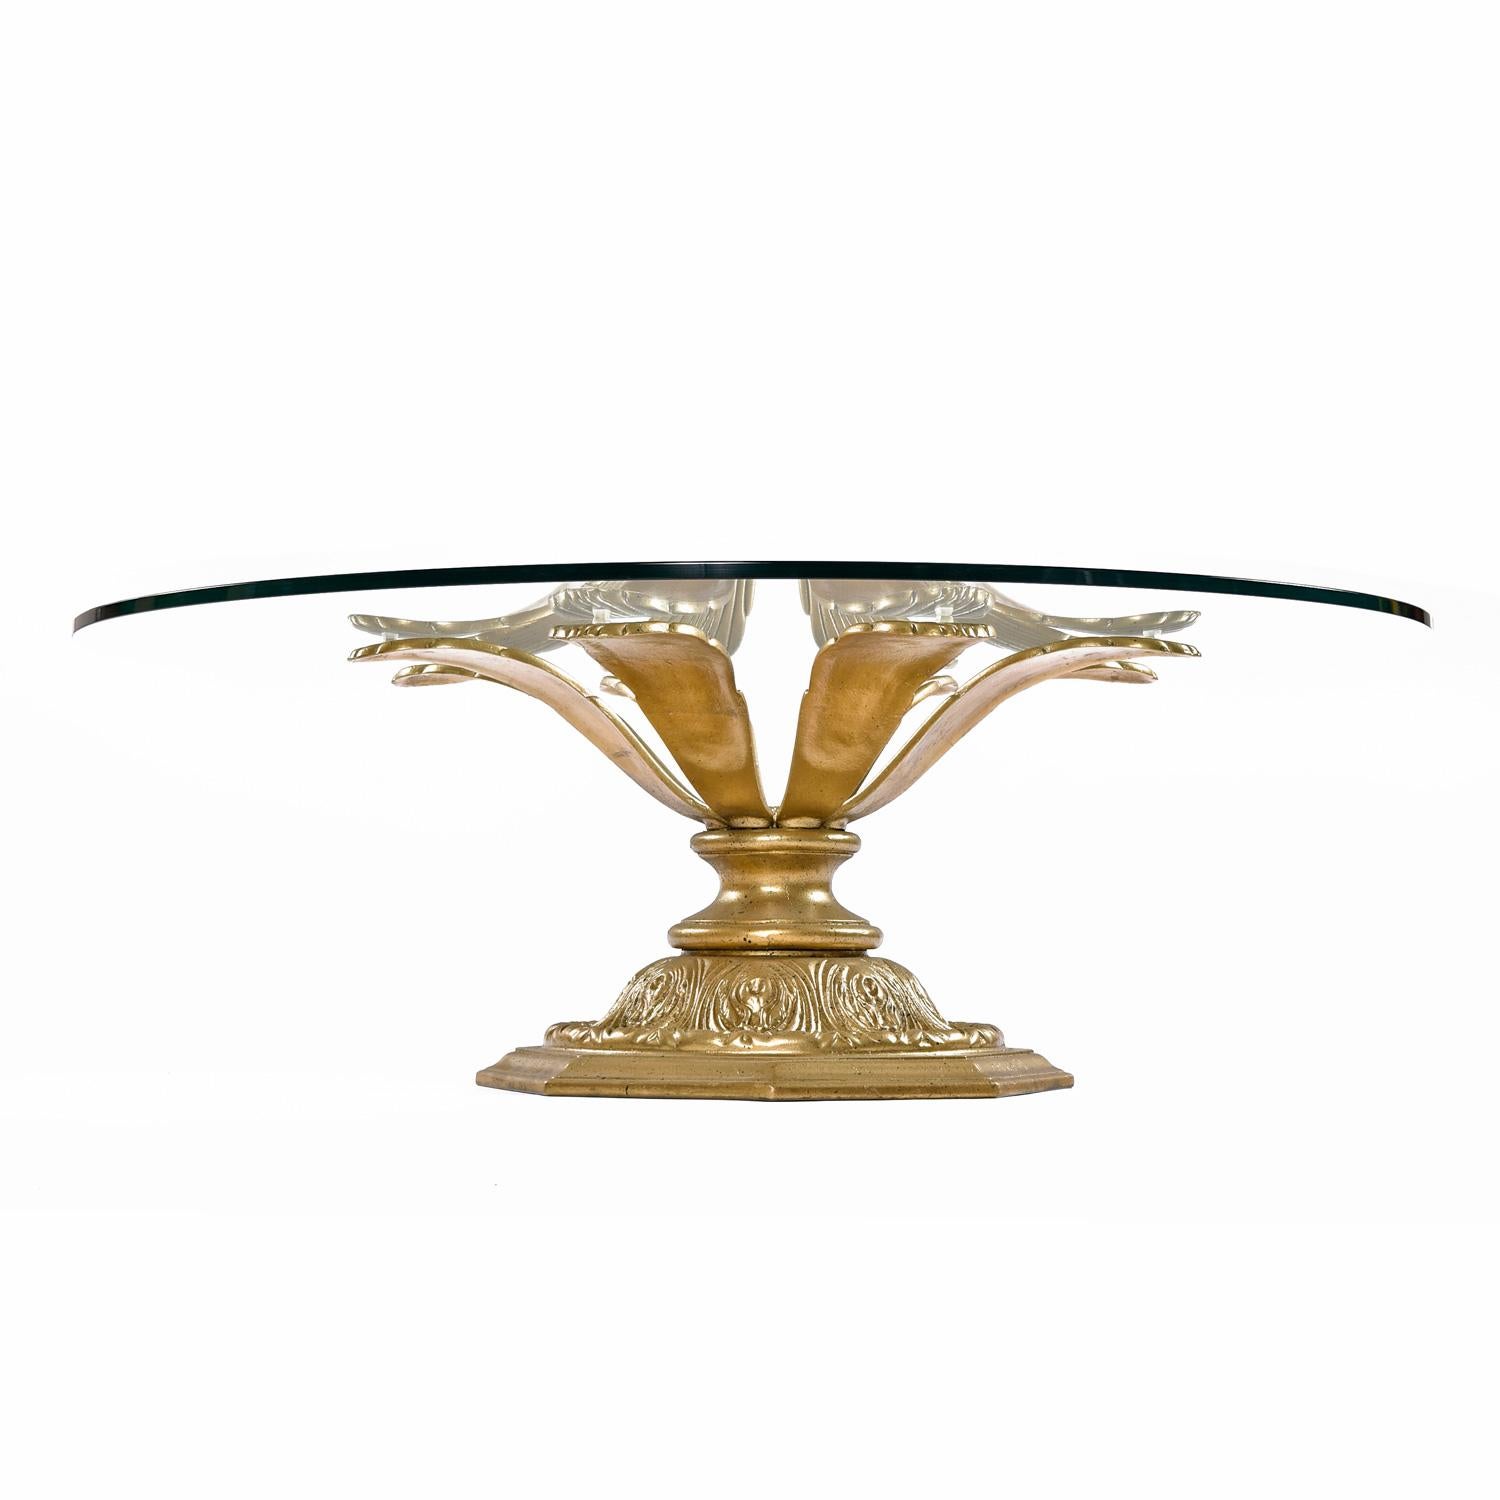 Blossoming Flower Petal Hollywood Regency Gilt Metal Glass Top Coffee Table In Excellent Condition For Sale In Chattanooga, TN